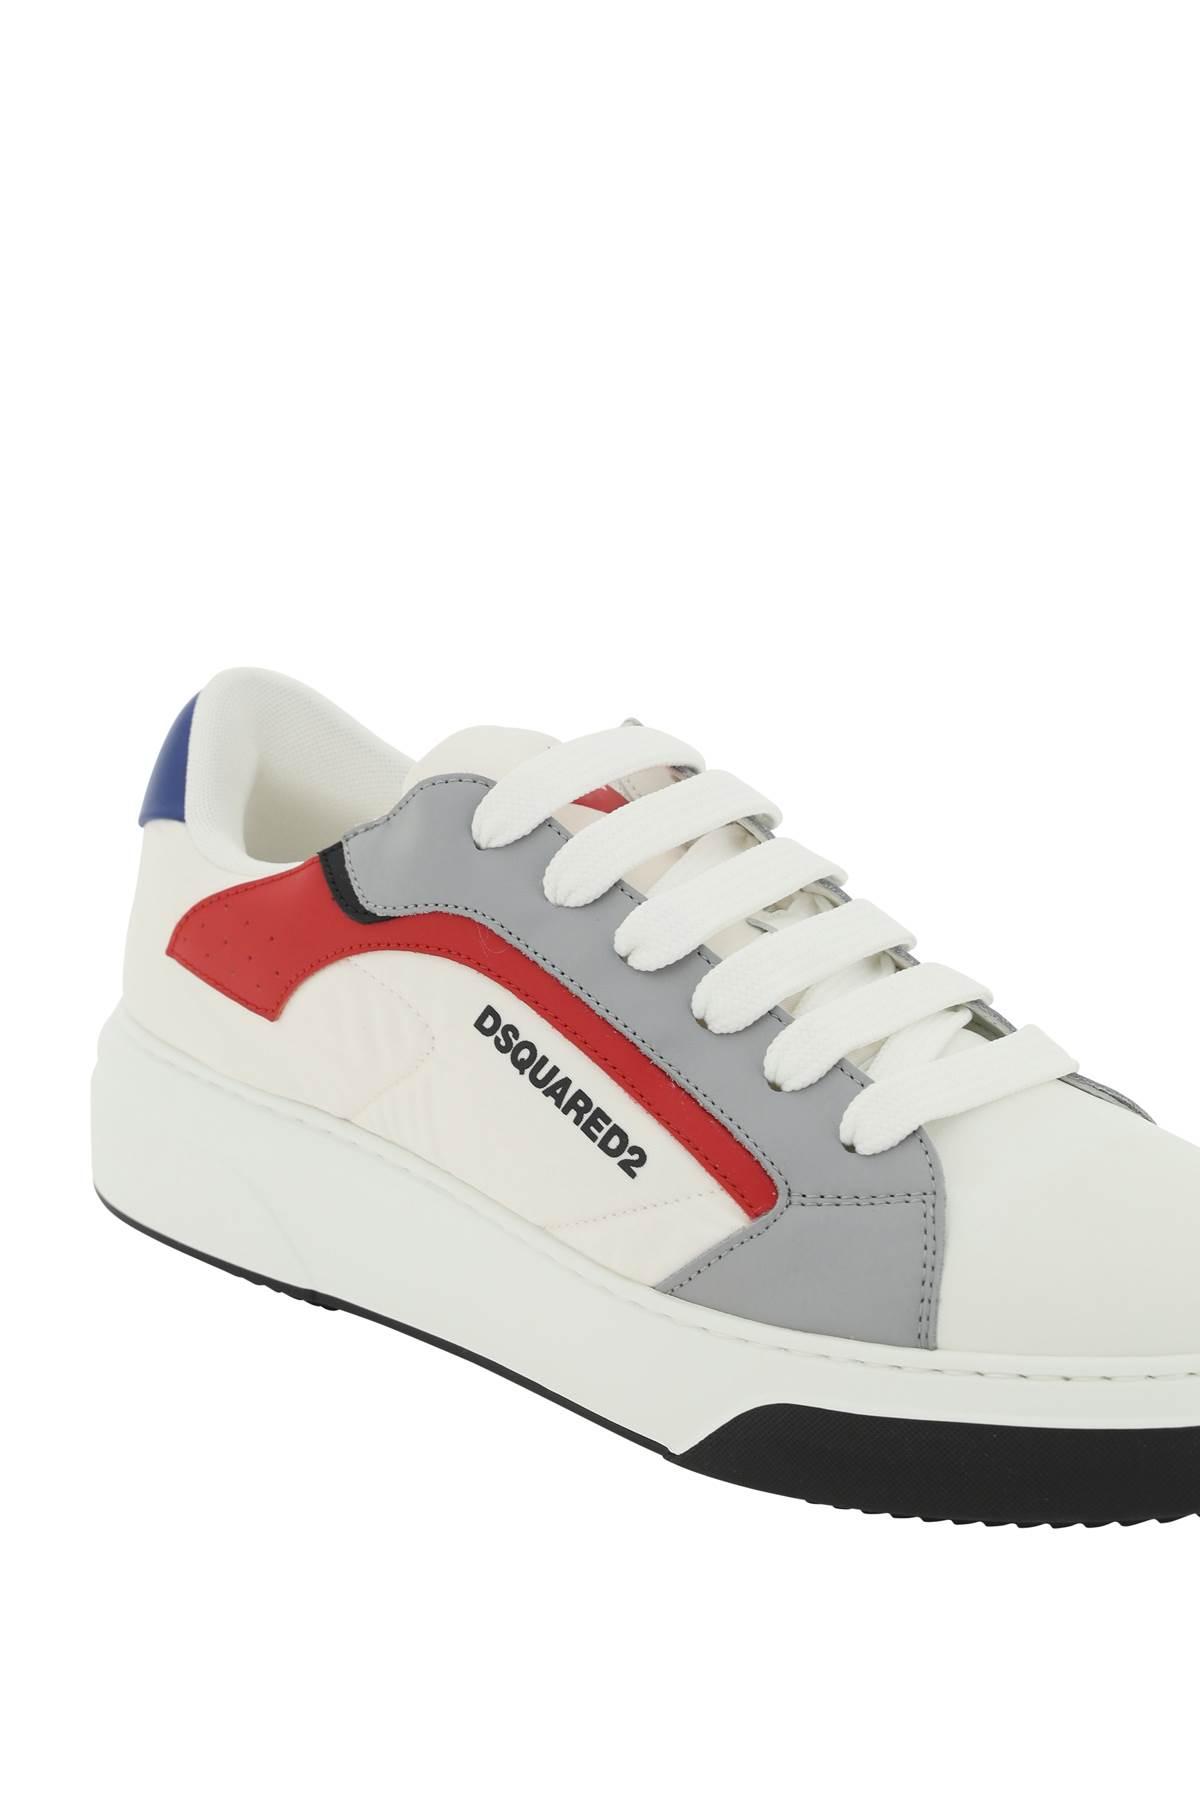 DSquared² Nylon And Leather 'bumper' Sneakers in White for Men | Lyst